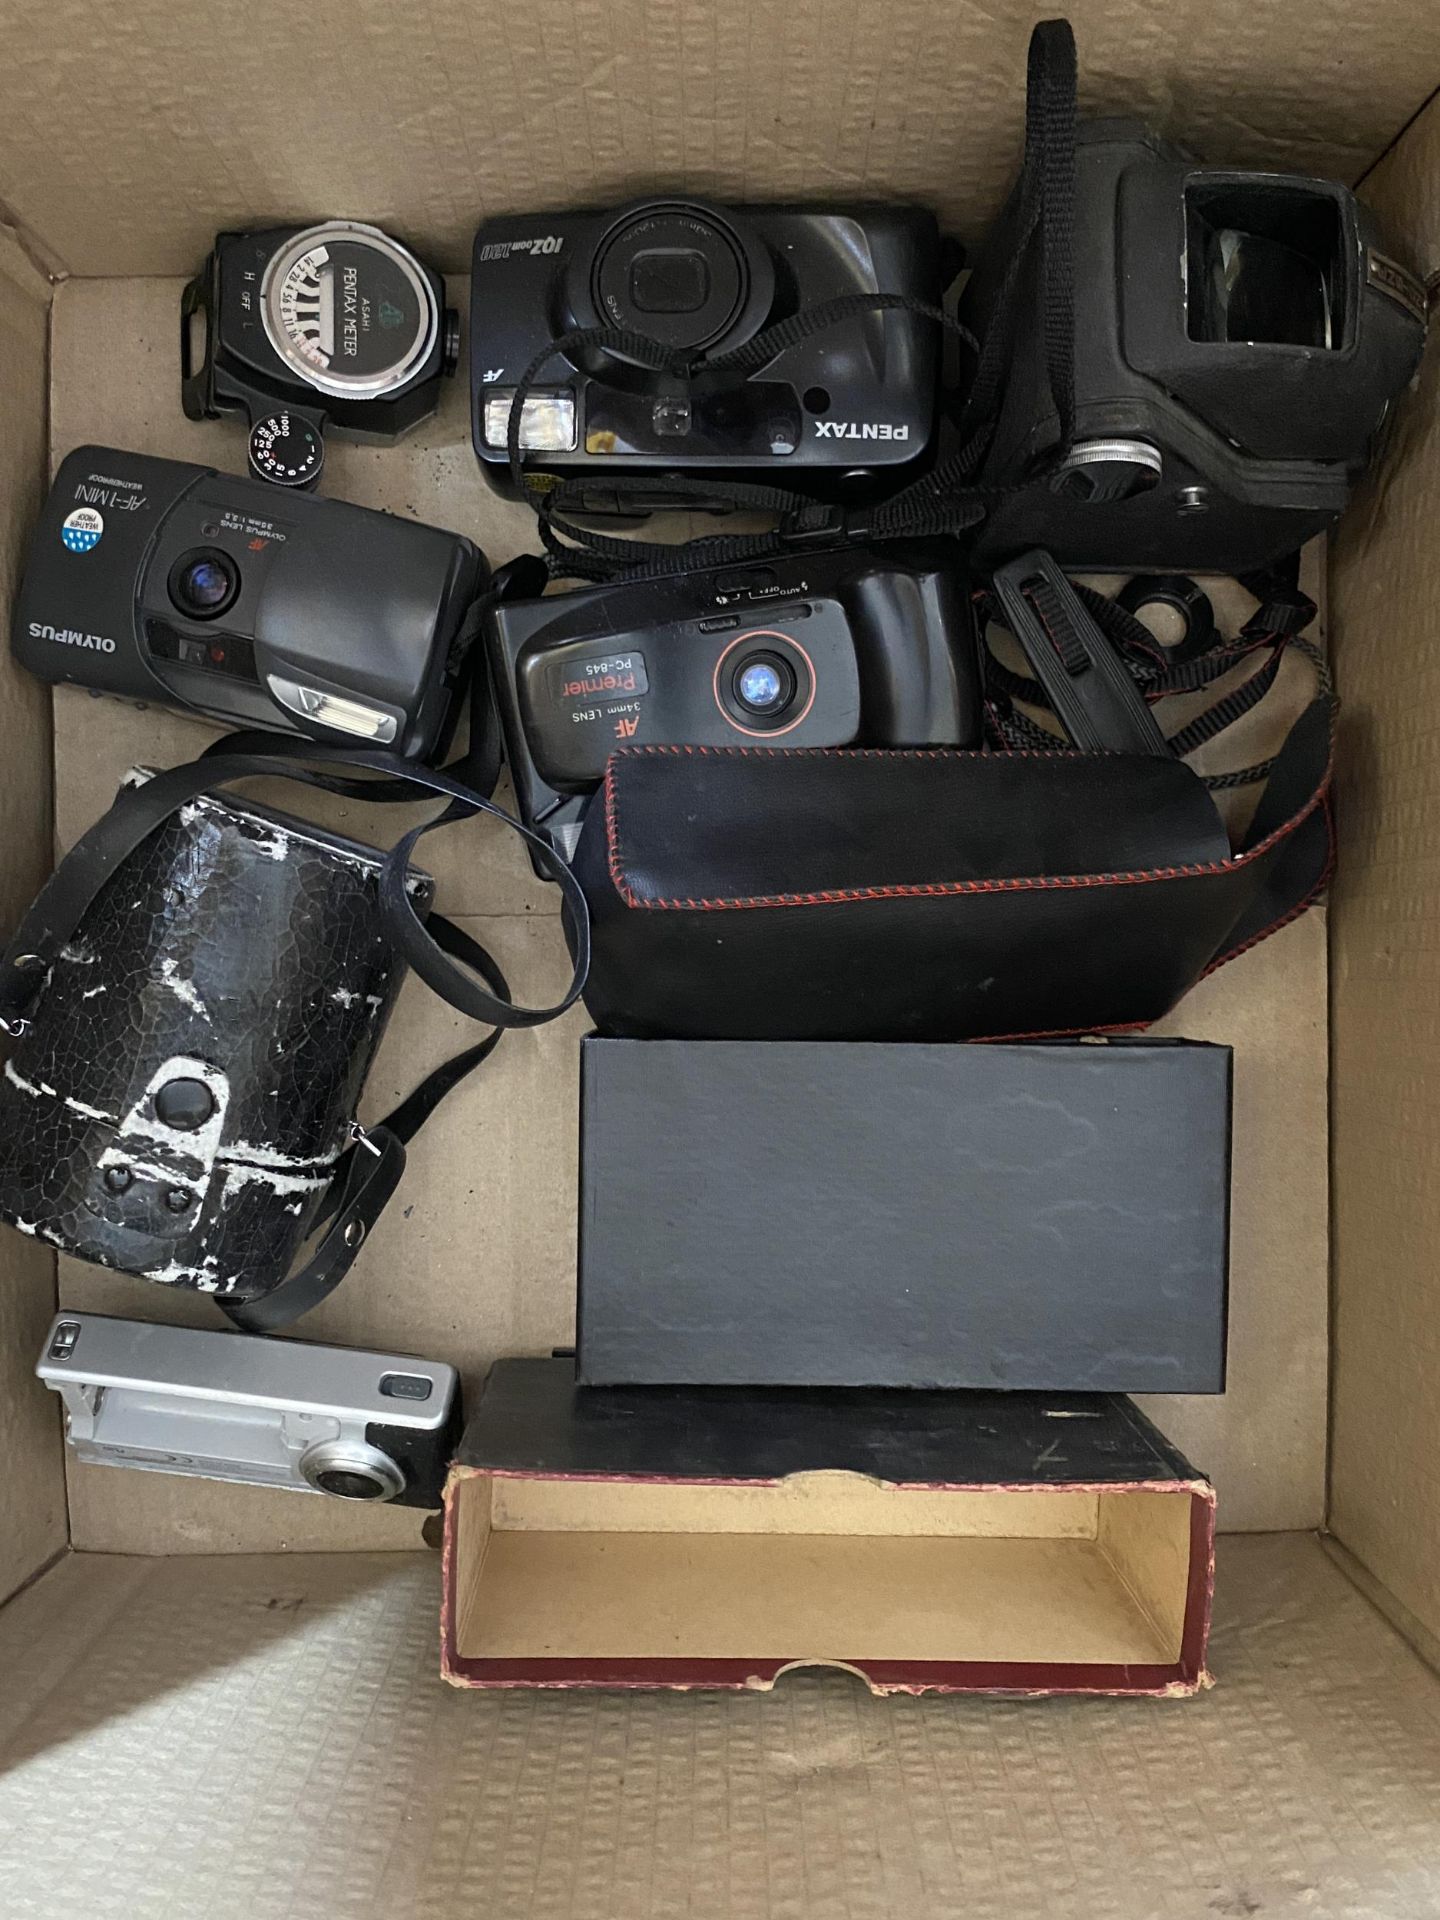 A LARGE COLLECTION OF VINTAGE CAMERAS, CANON EOS300 BODY, VINTAGE EASTMAN KODAK FOLDING CAMERAS, - Image 8 of 8